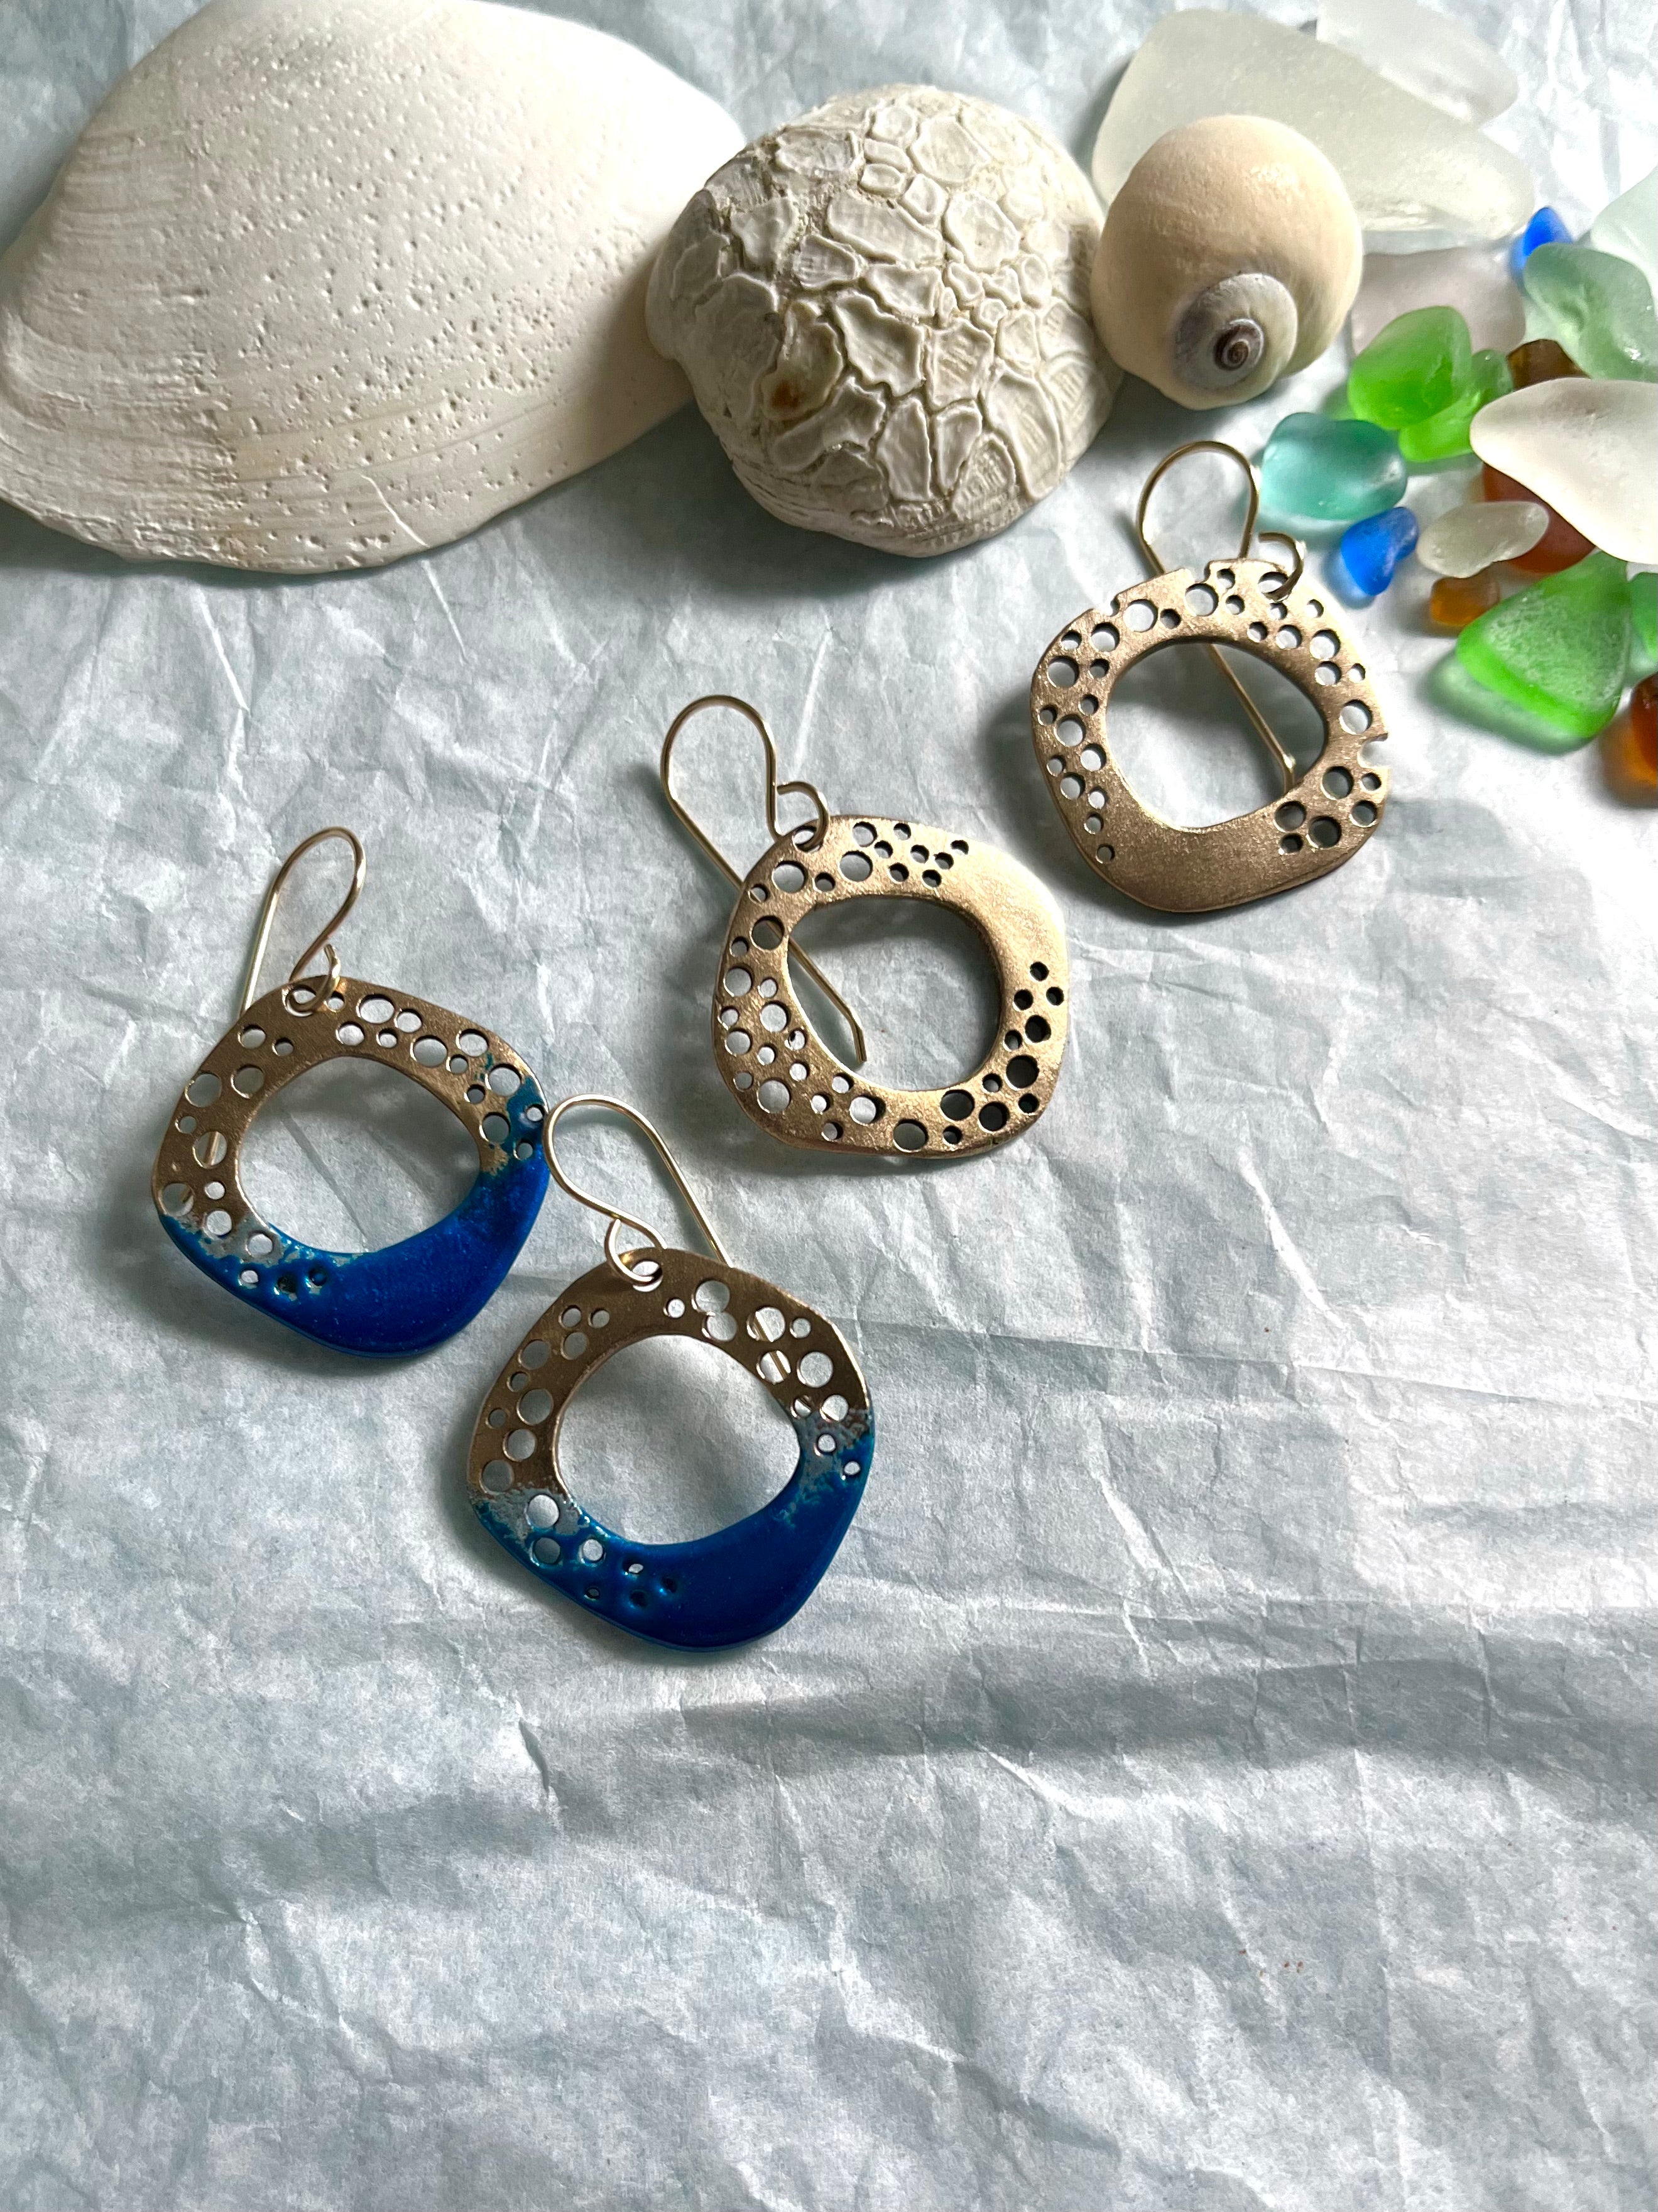 Hoop earrings with shells and seaglass